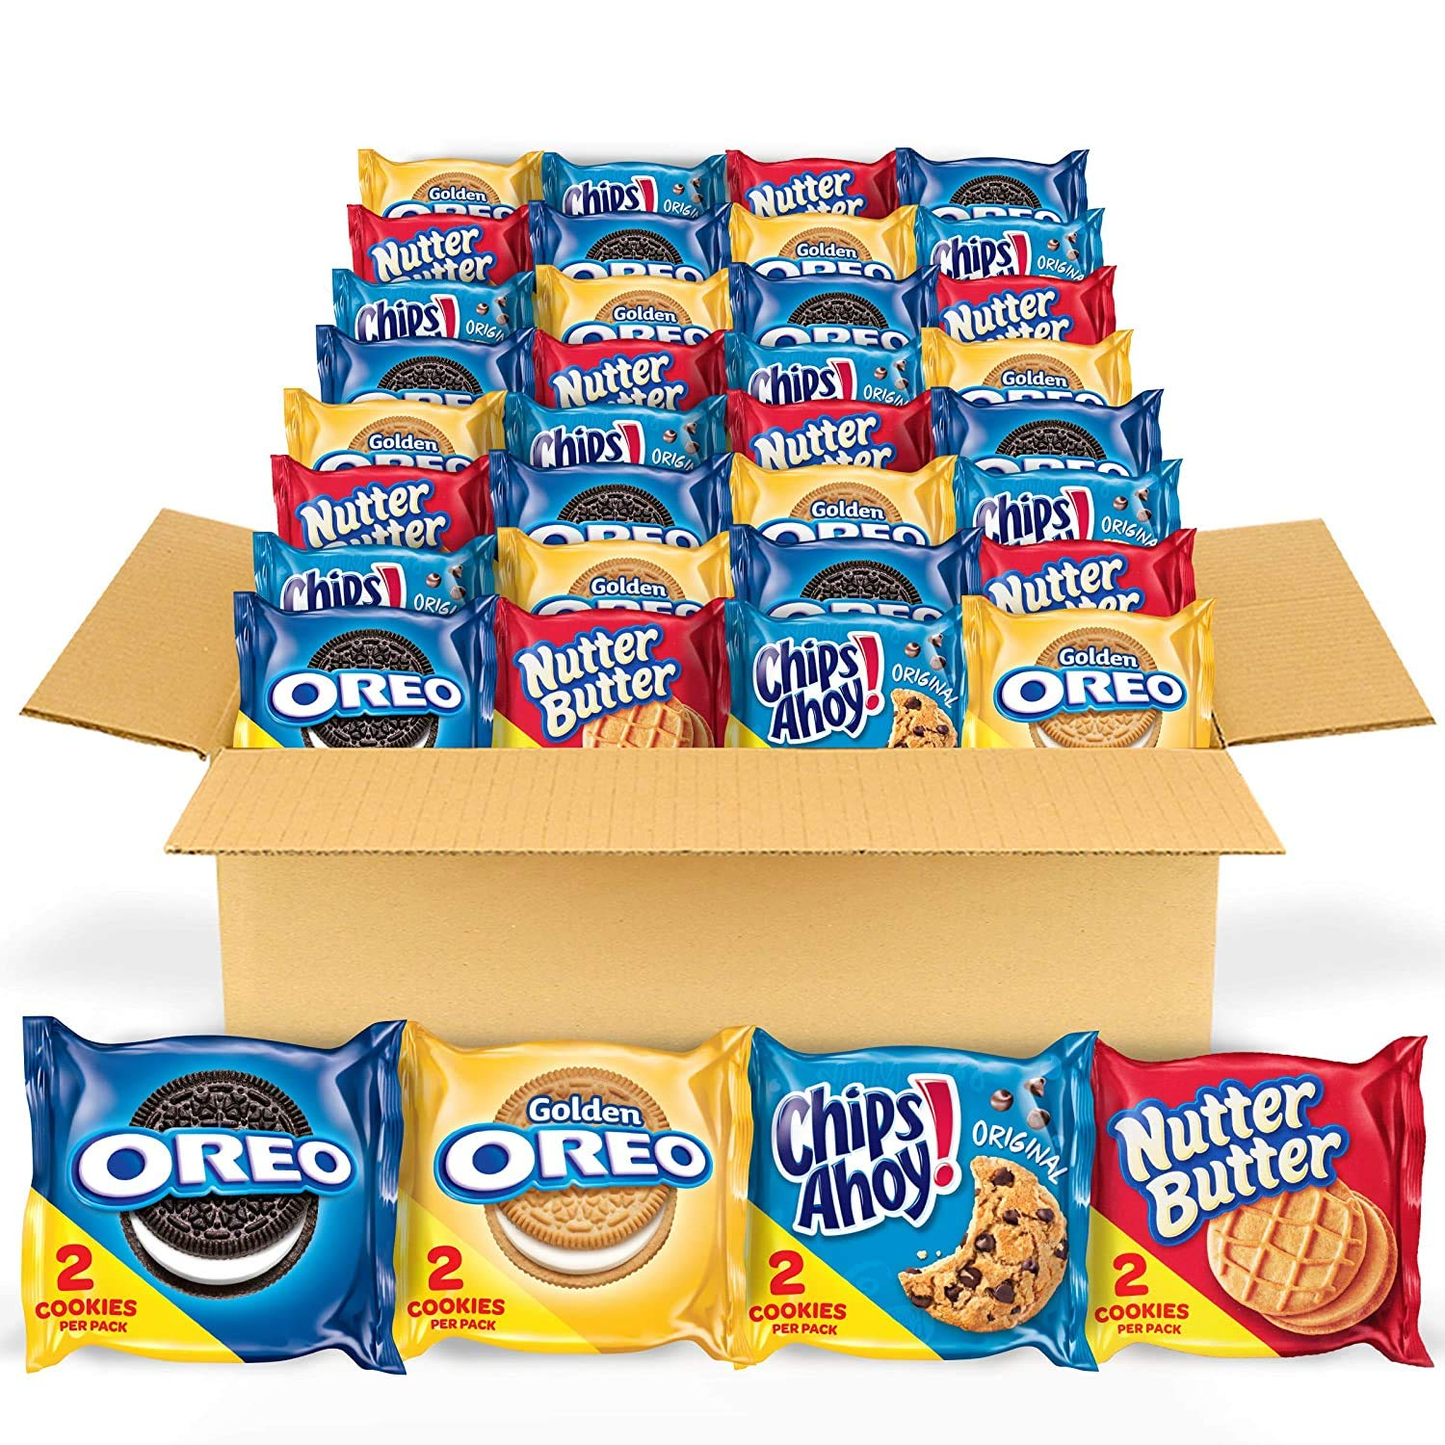 56 Snack Packs - OREO Original, OREO Golden, CHIPS AHOY! & Nutter Butter Cookie Snacks Variety Pack, Easter Cookies